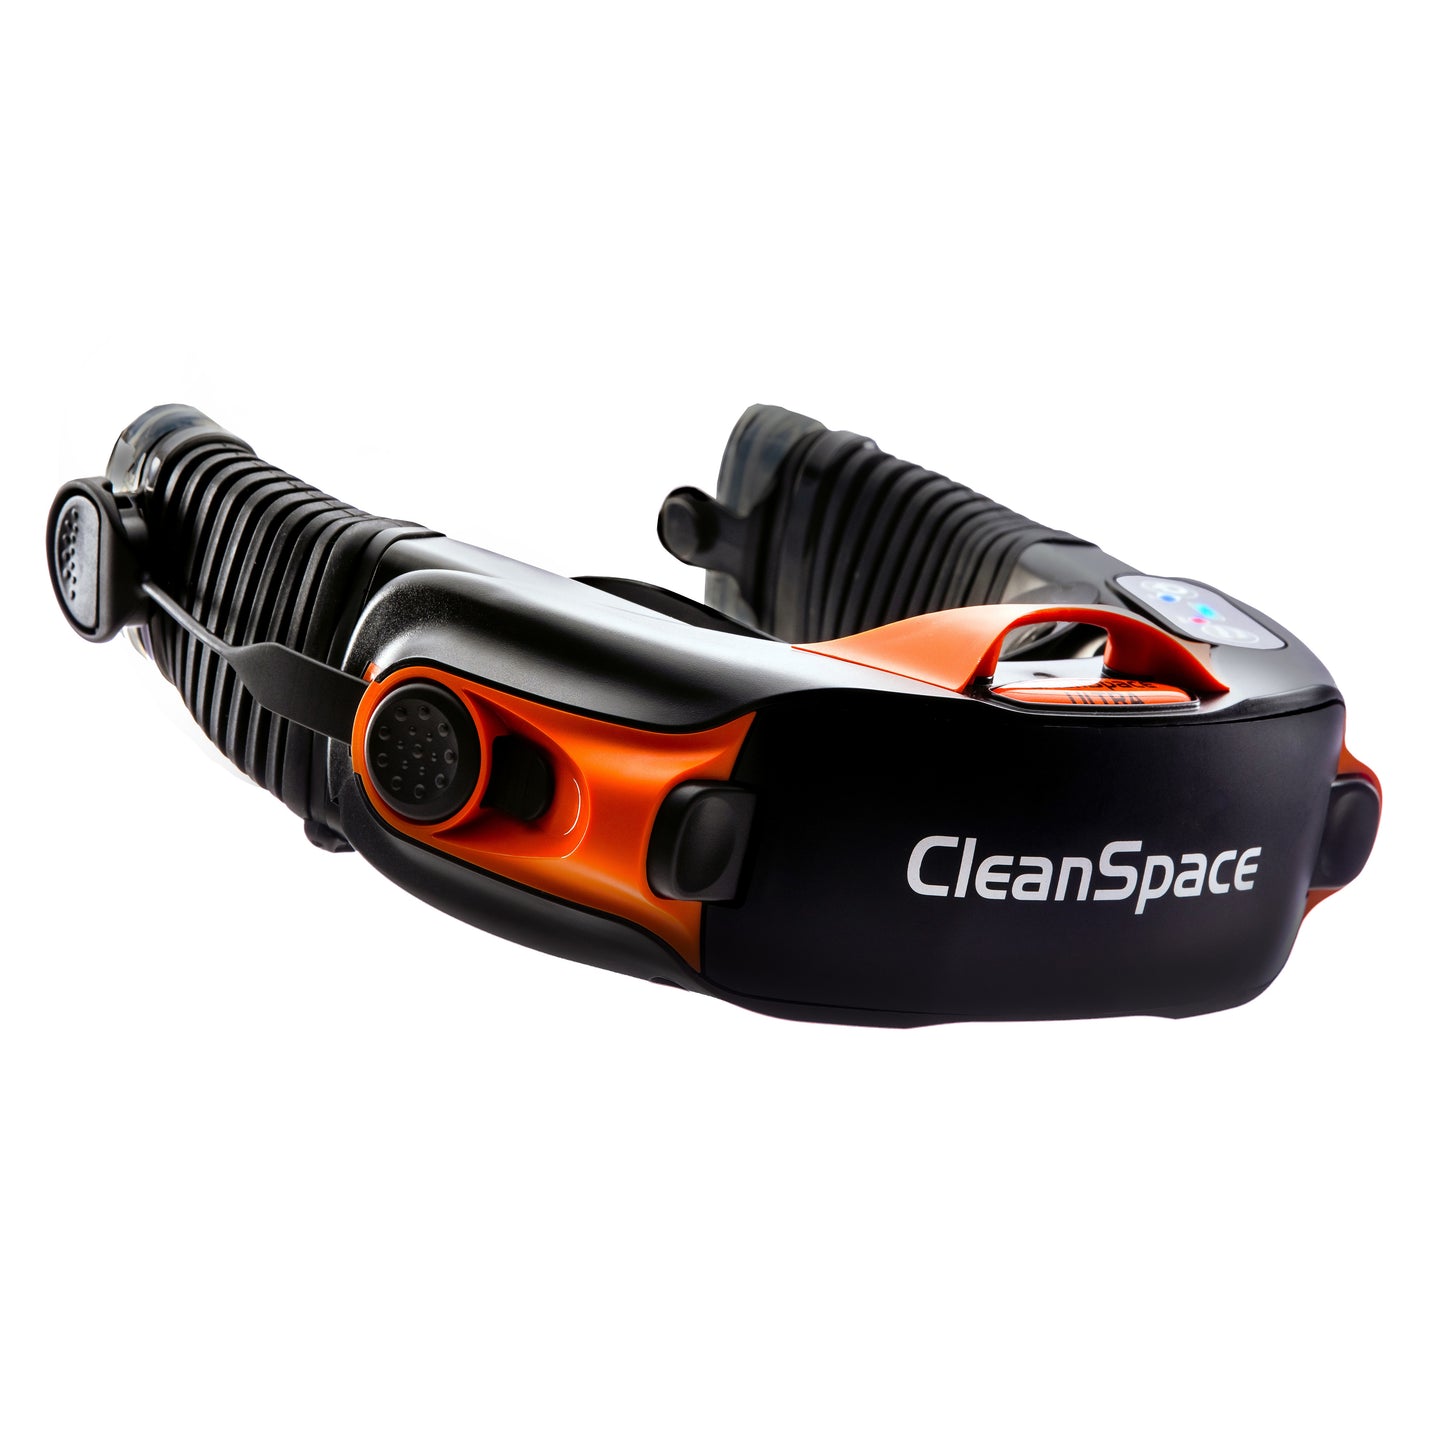 CLEANSPACE CST1010 ULTRA POWER SYSTEM